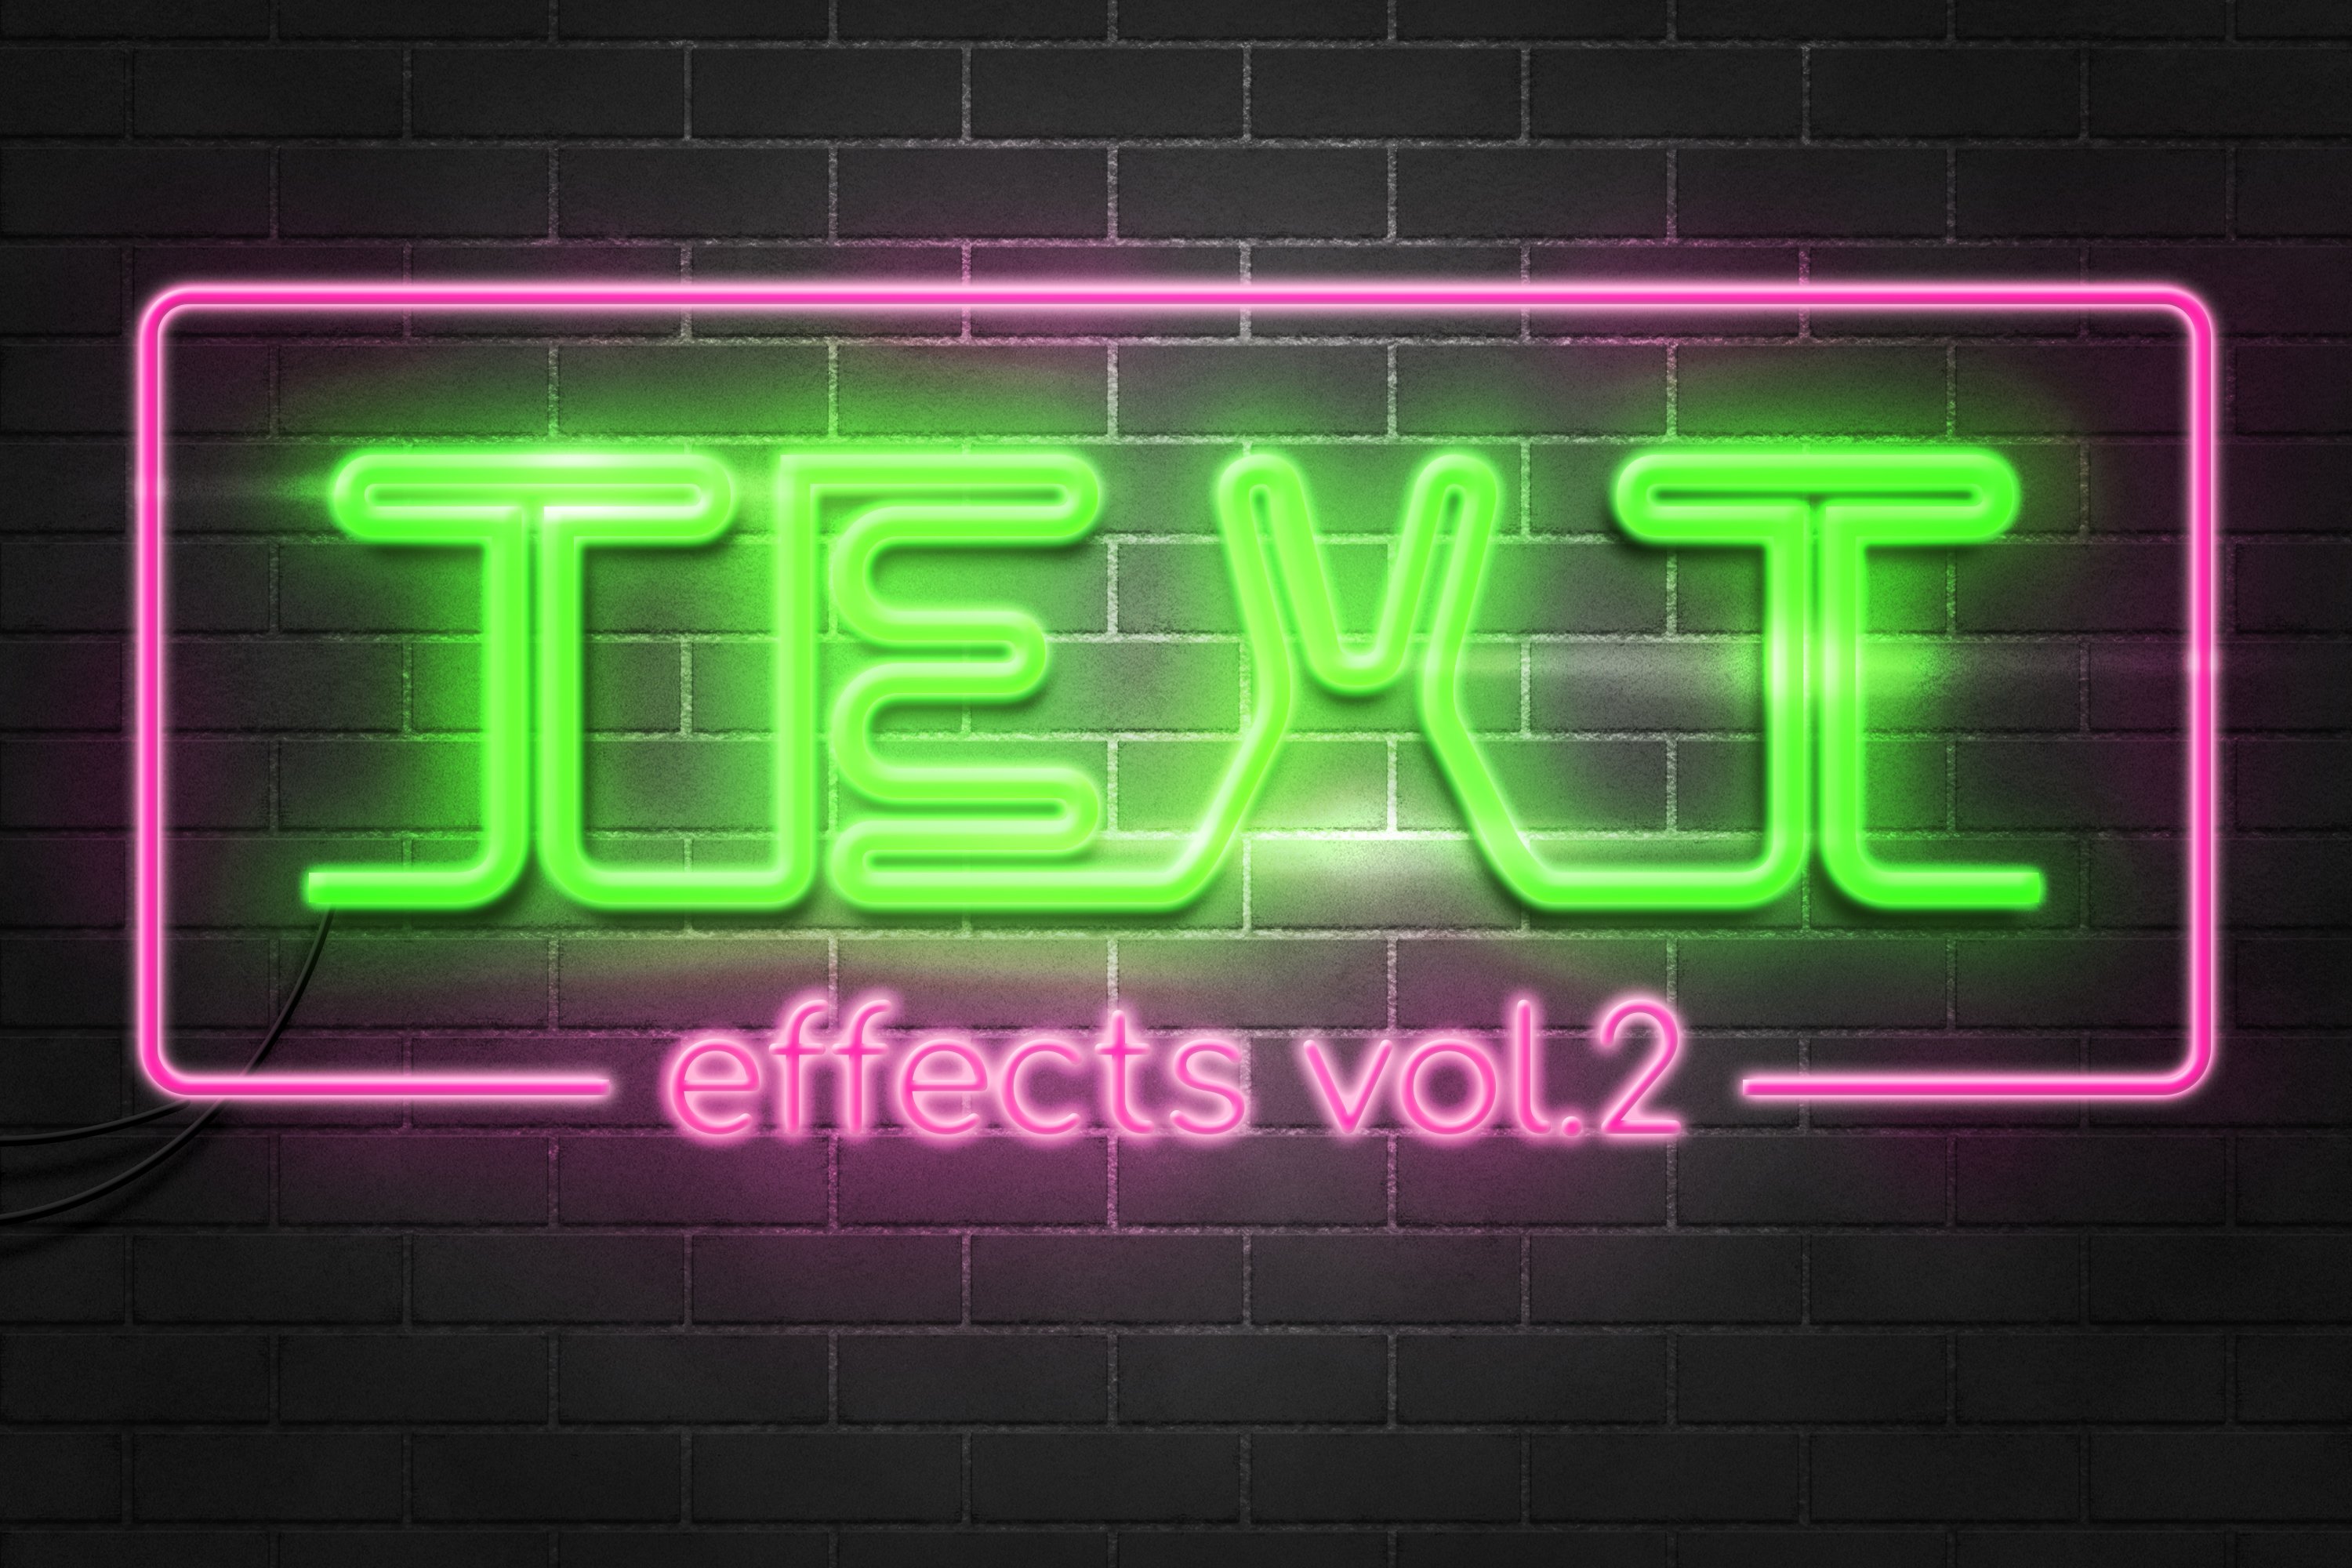 Photoshop Text Effects Pack vol.2cover image.